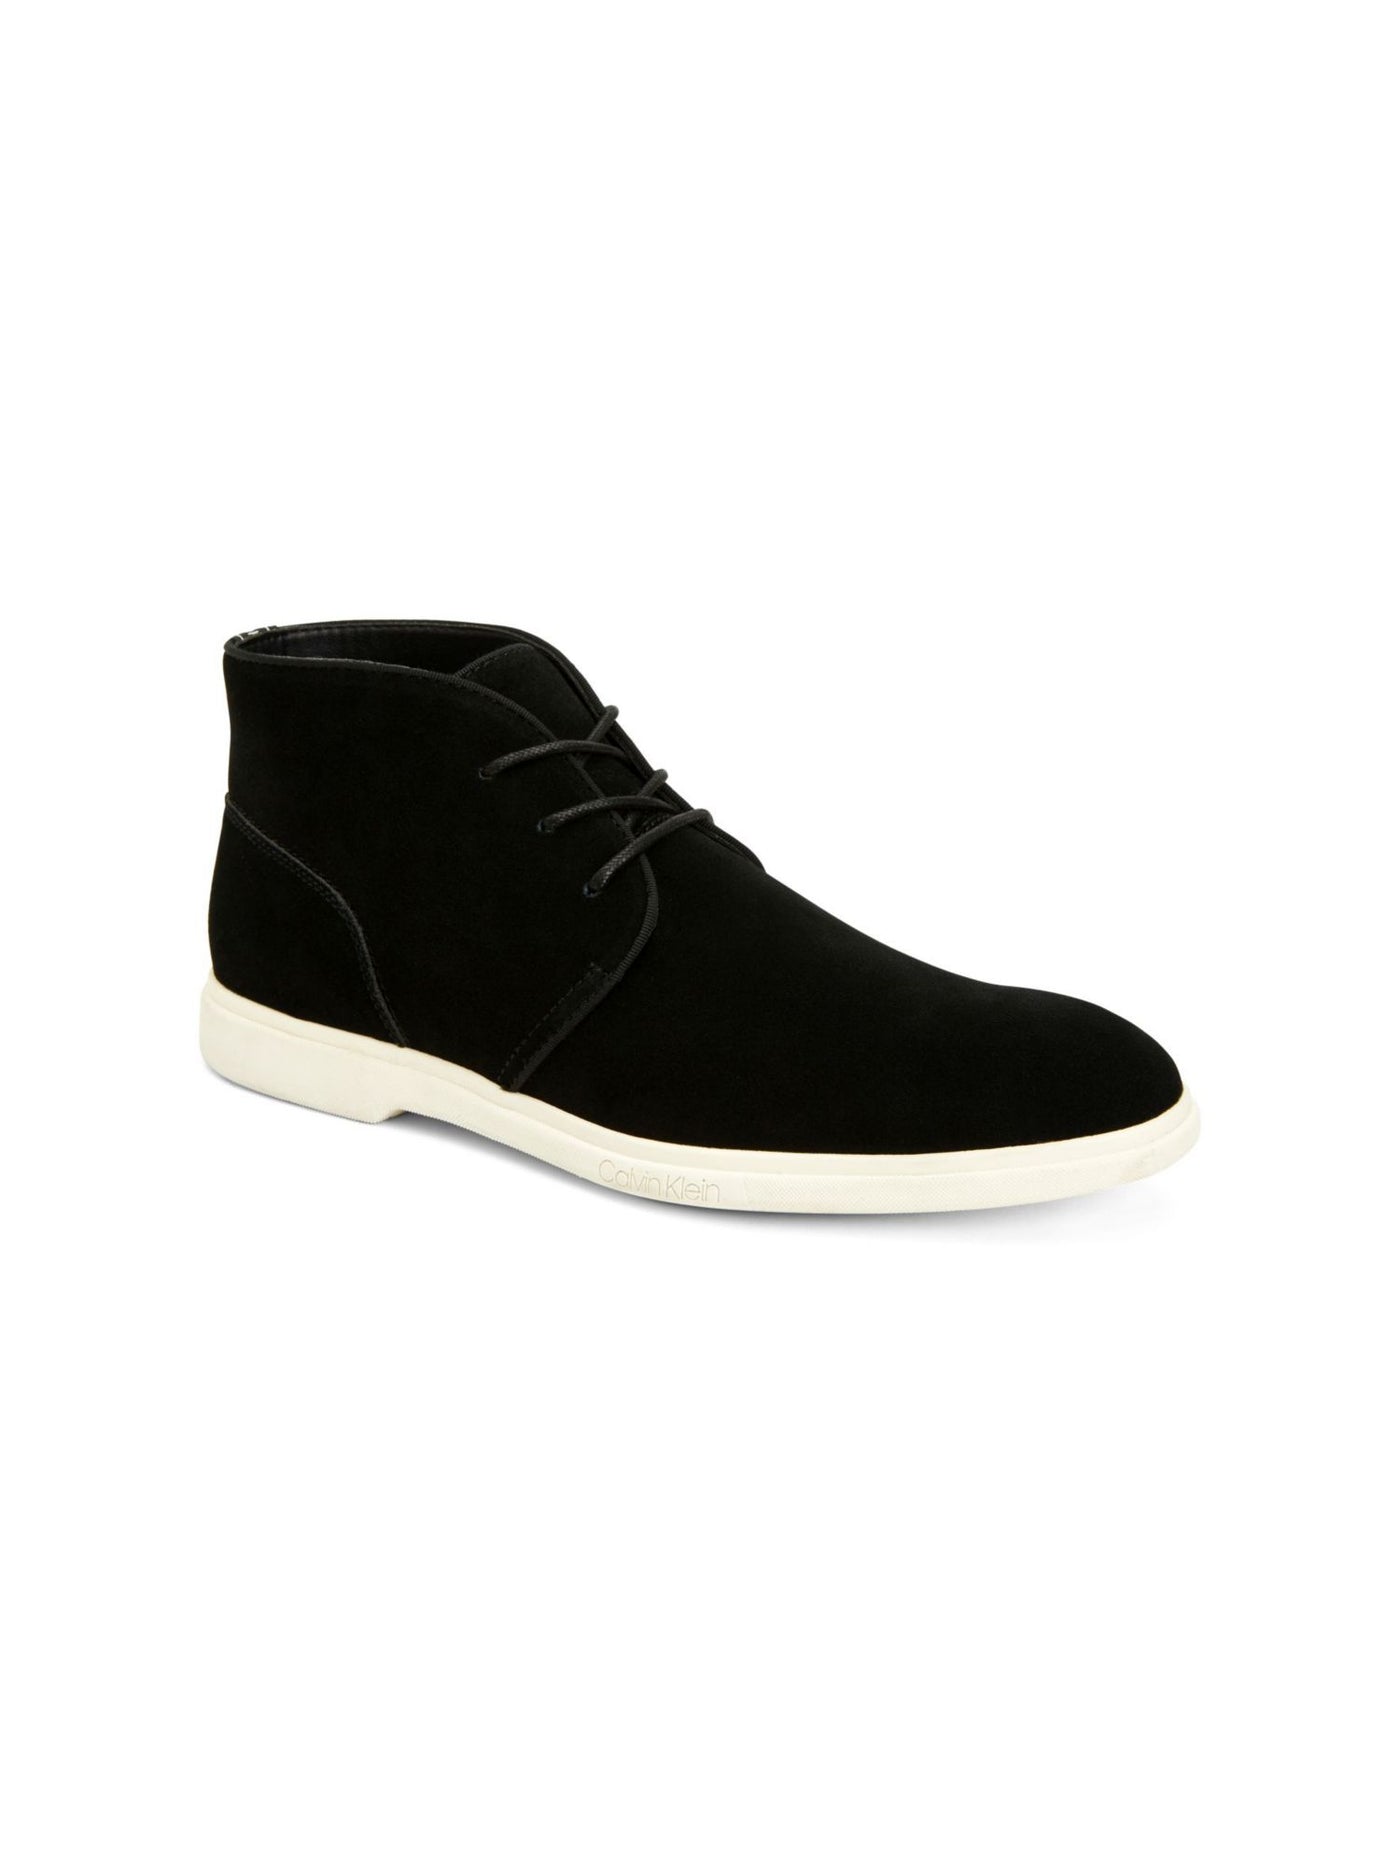 CALVIN KLEIN Mens Black Contrast Sole Padded Teddy Round Toe Lace-Up Leather Chukka Boots 11.5